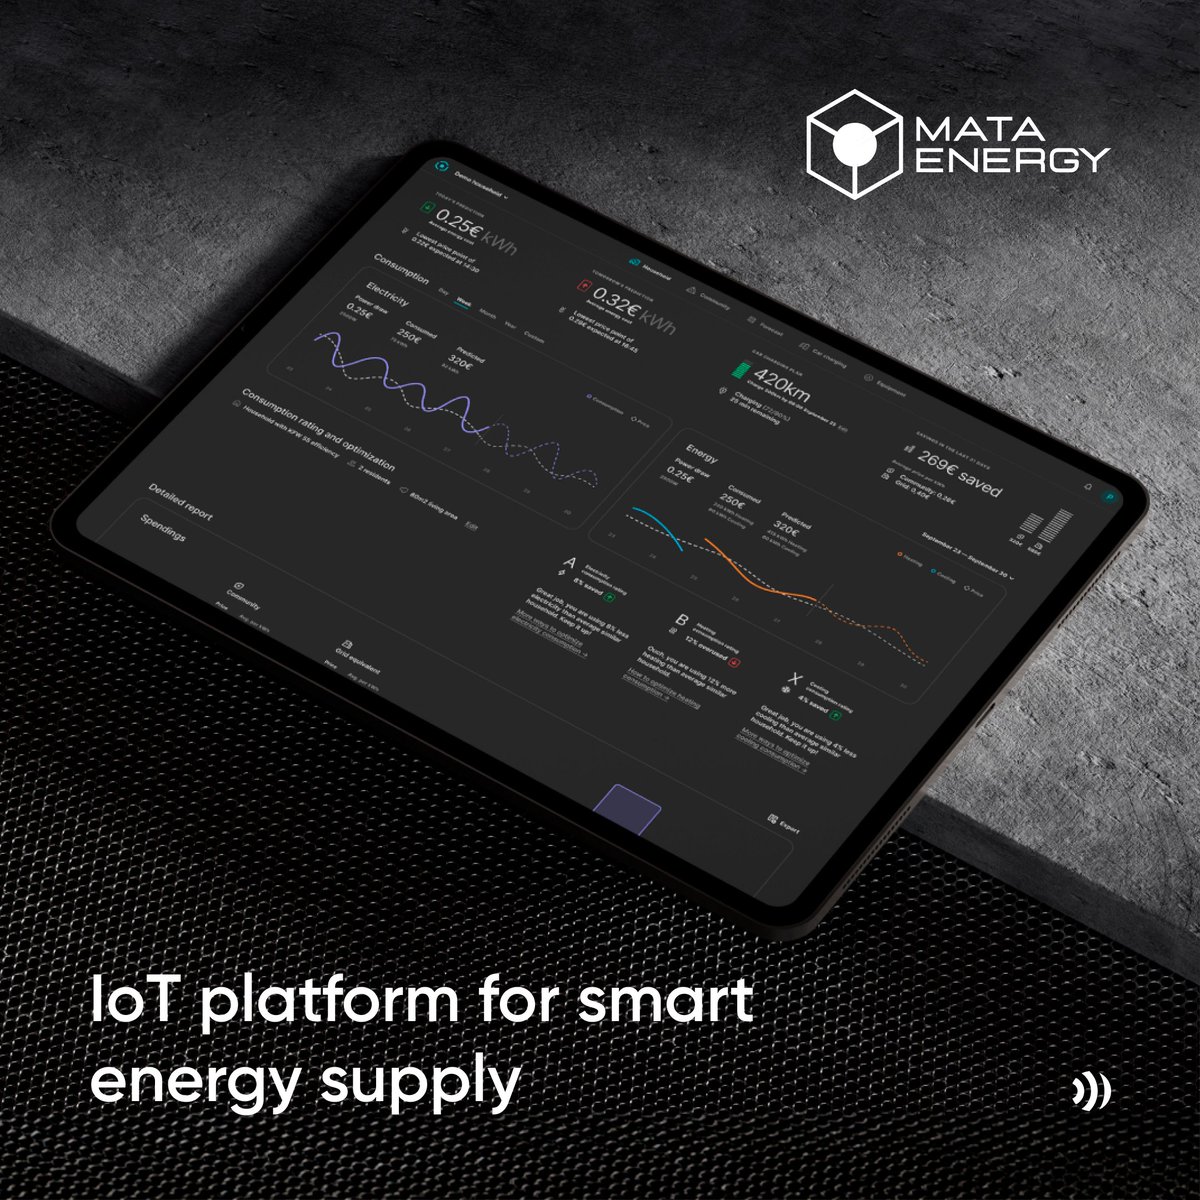 Excited to share details of the project we have  completed for MATA Energy, a German startup. We supported the customer in creating an MVP for their IoT-based platform, which is aimed at digitizing energy grids. Learn more — go.wavea.cc/mataenergy.
#Energy #IoT #GreenTransition